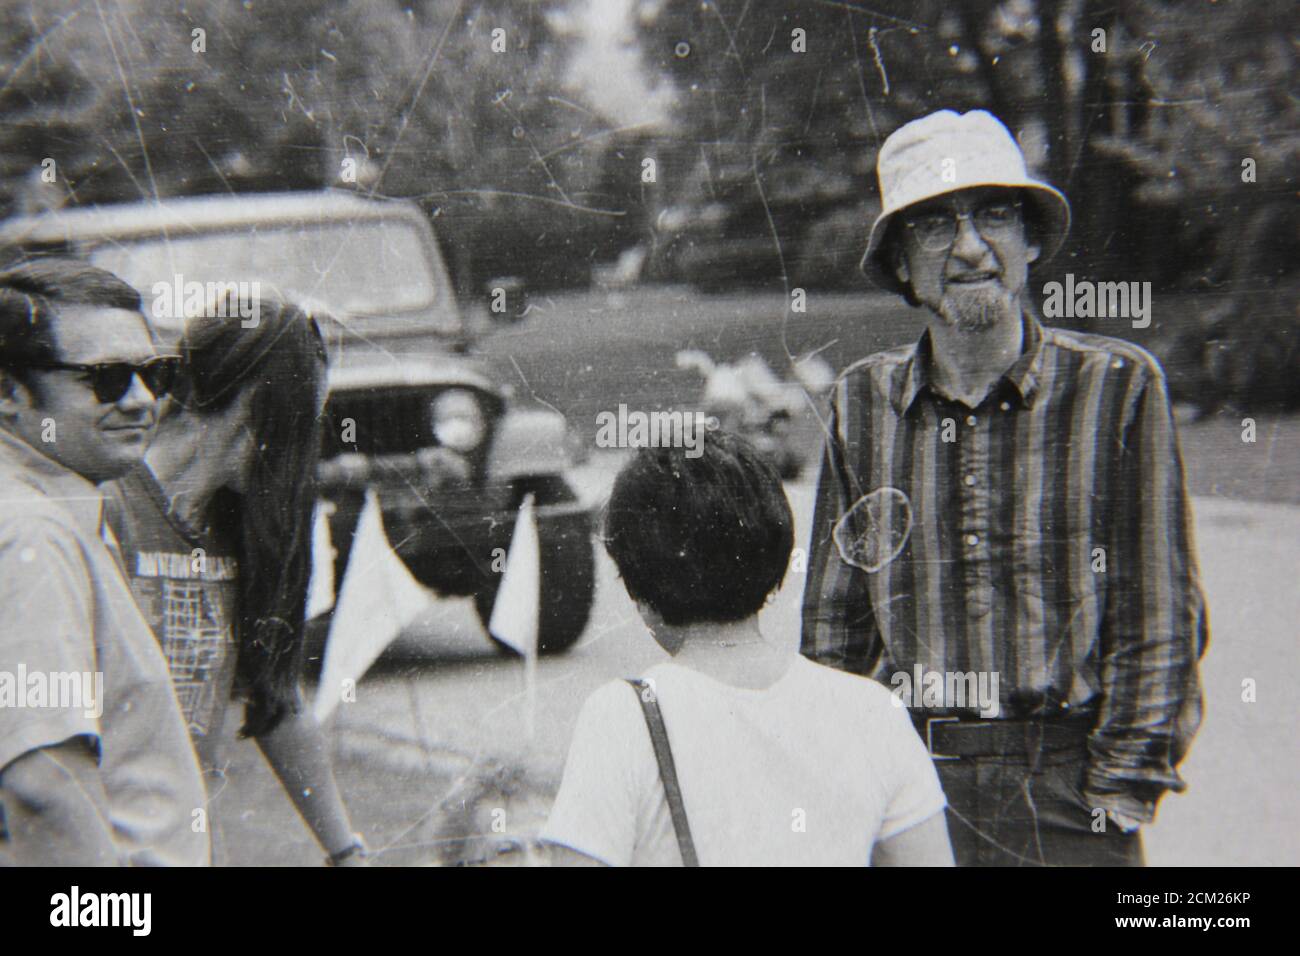 Fine 70s vintage black and white photography of neighbors hanging out at a suburban neighborhood block party. Stock Photo